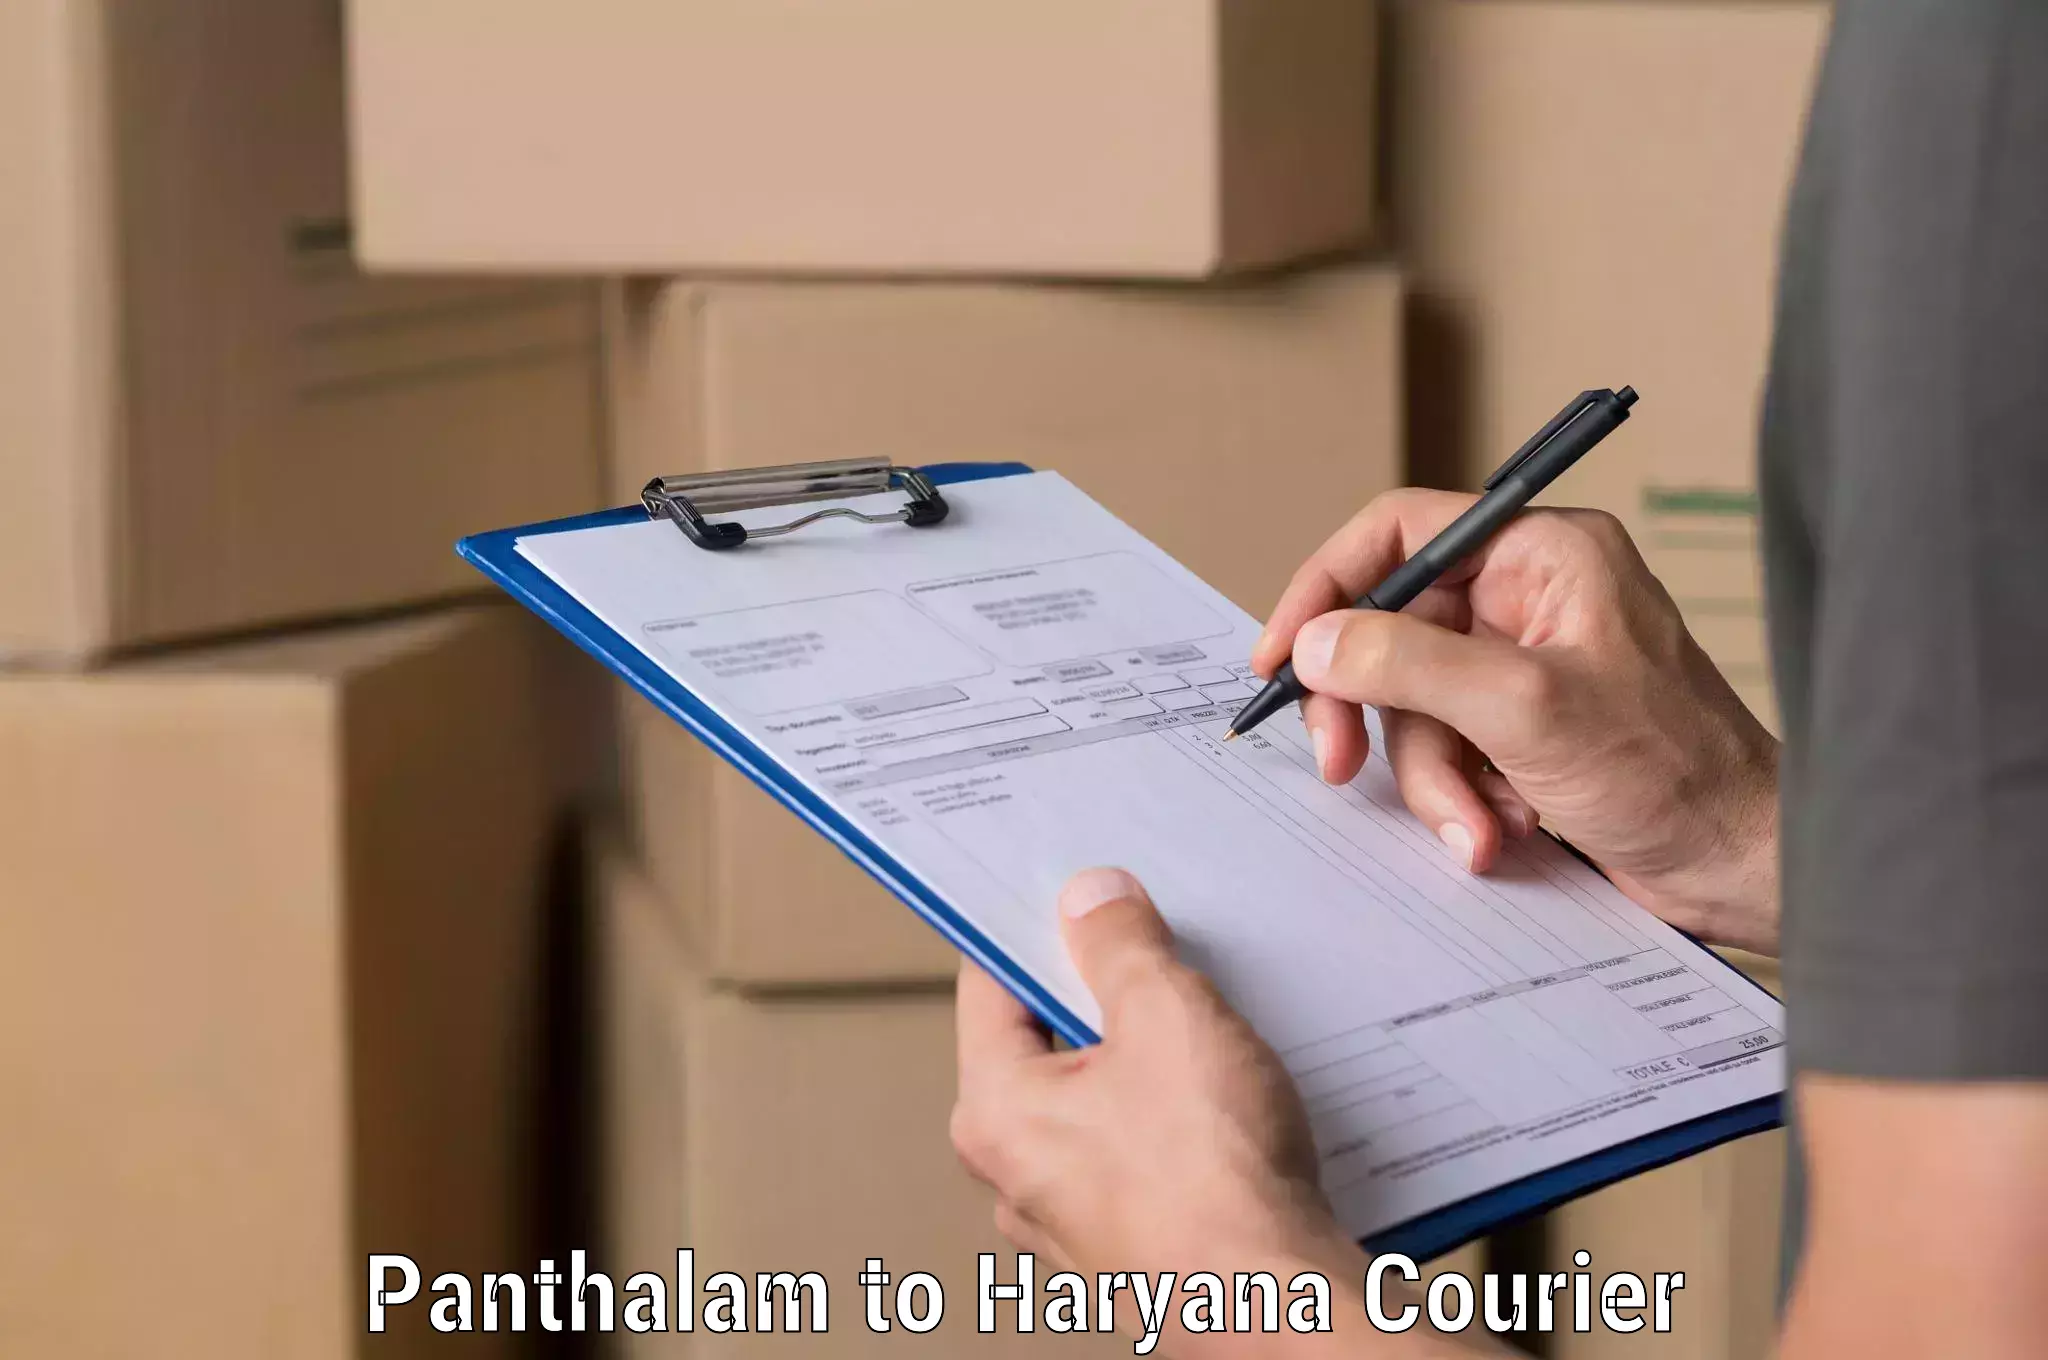 Courier app Panthalam to Bhuna